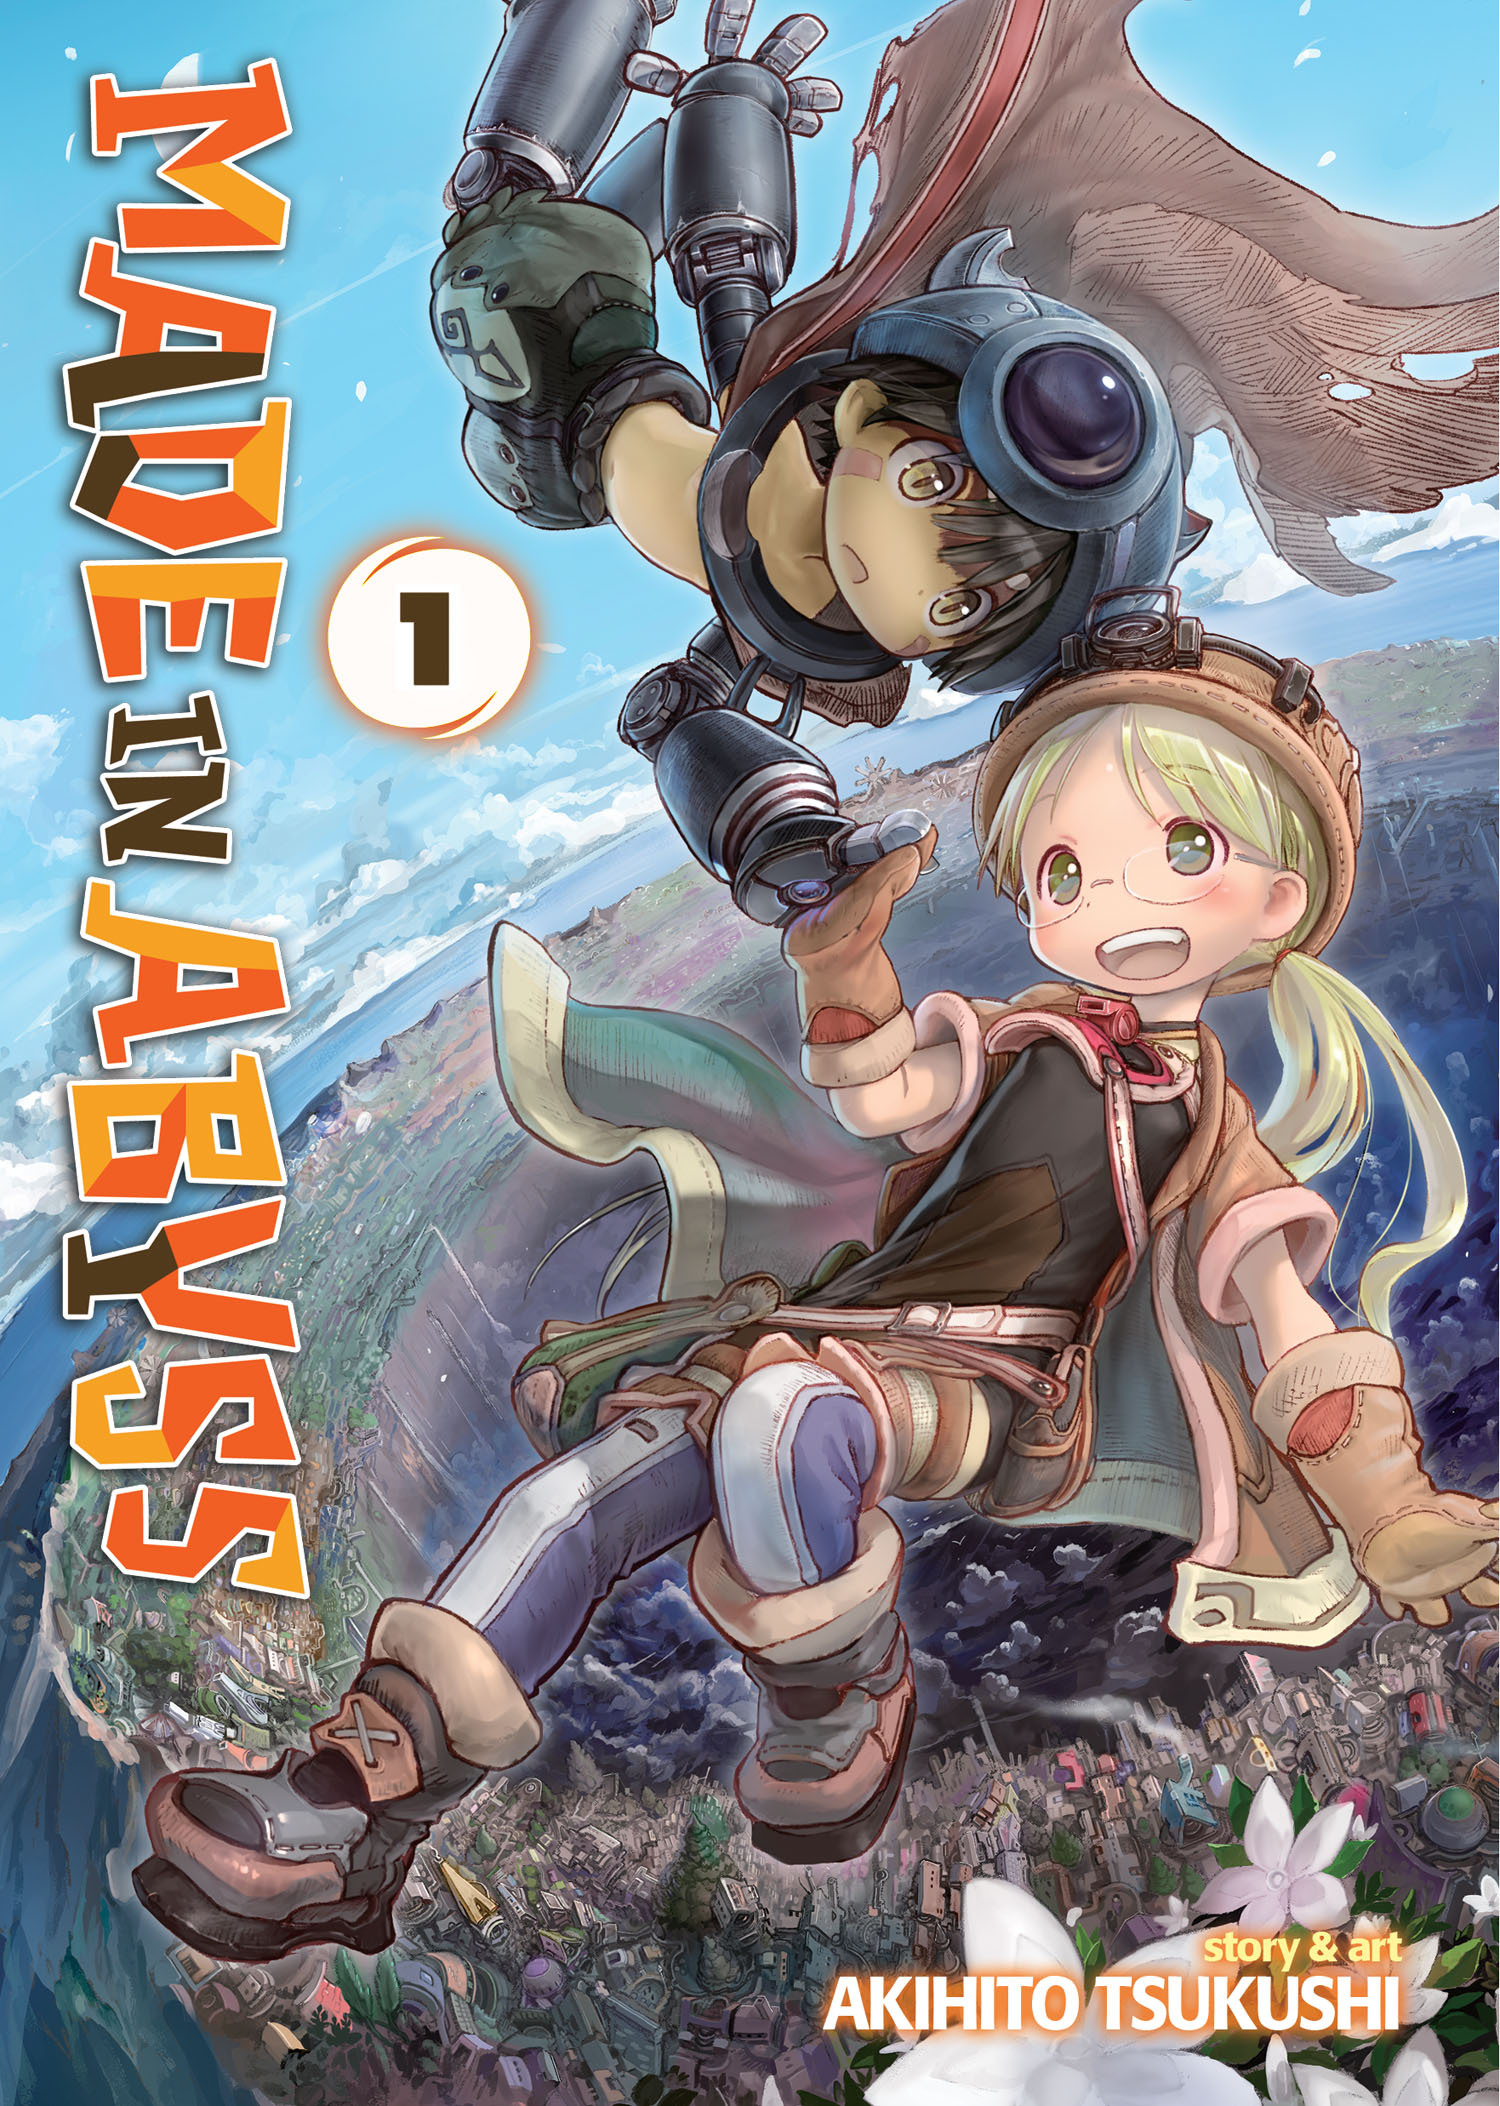 Made in Abyss - Season 1 Box Set